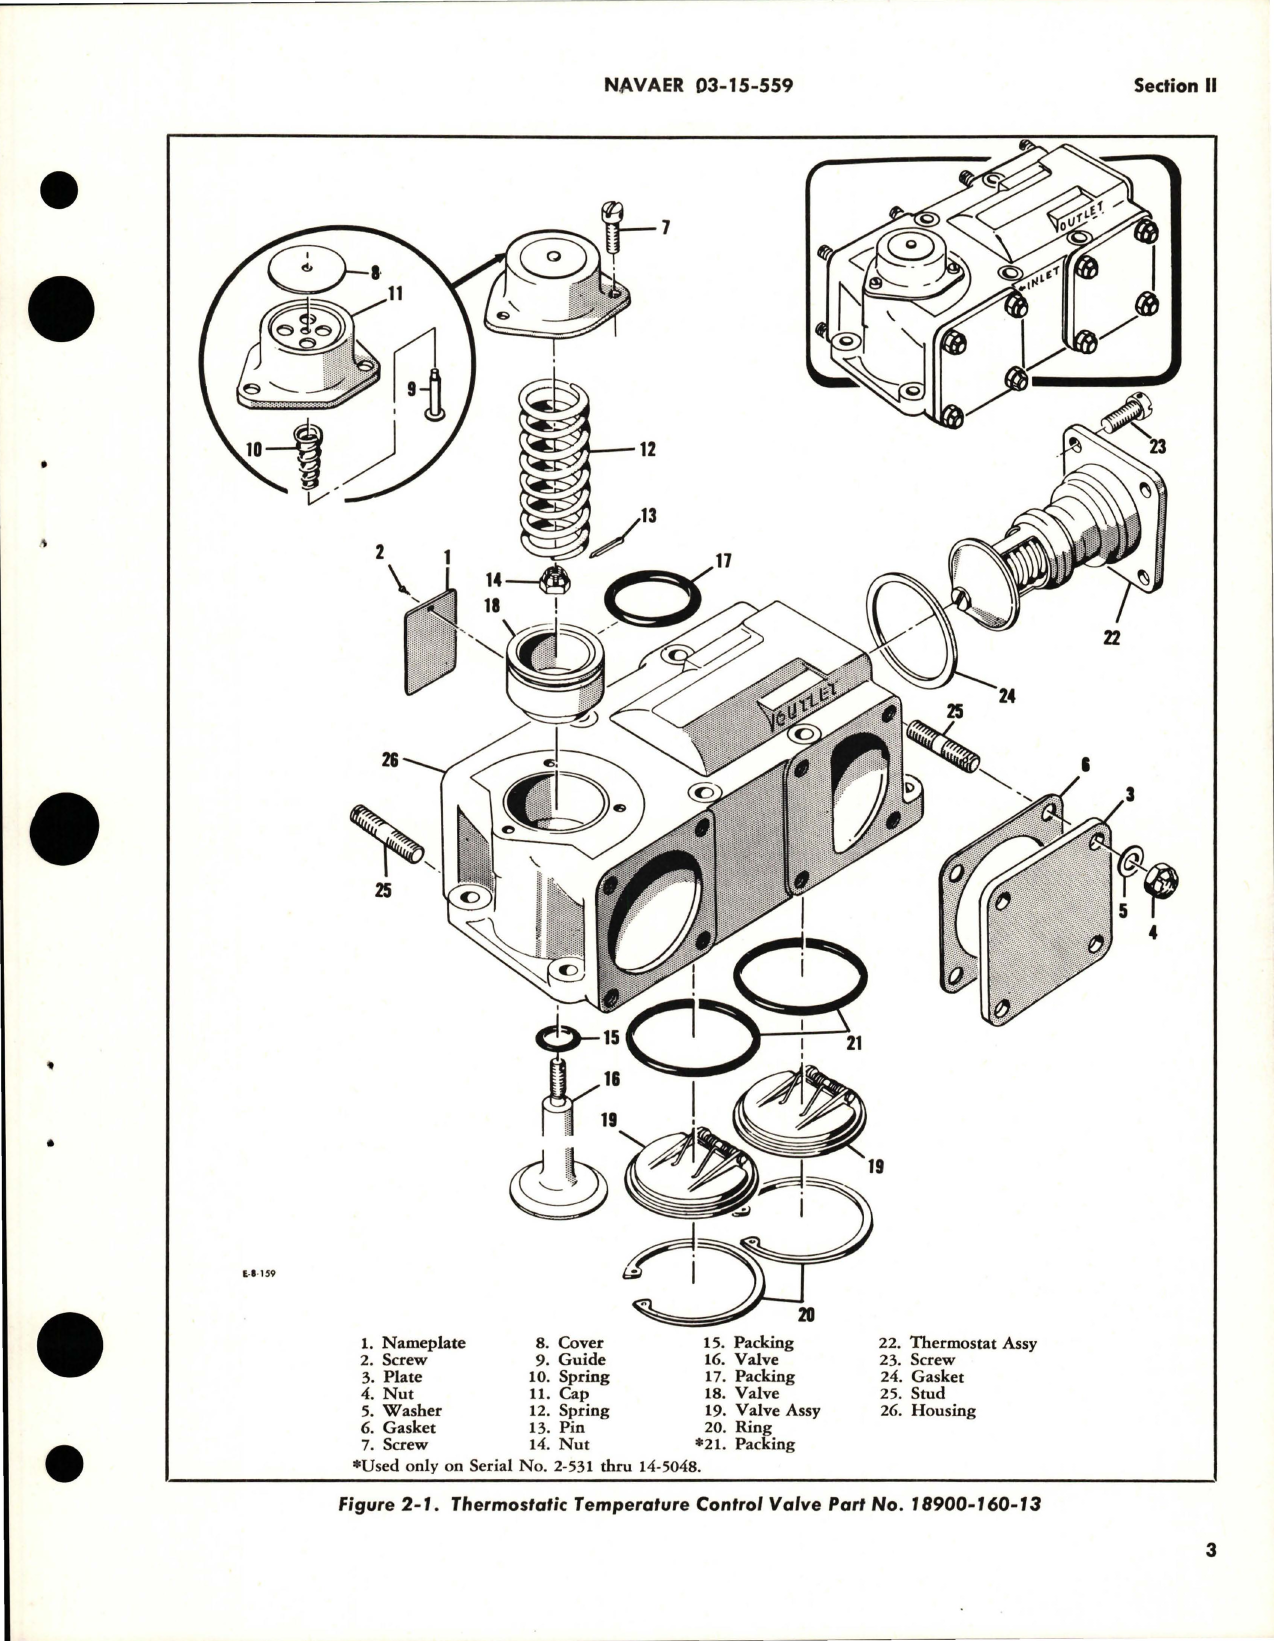 Sample page 7 from AirCorps Library document: Overhaul Instructions for Thermostatic Temperature Control Valves